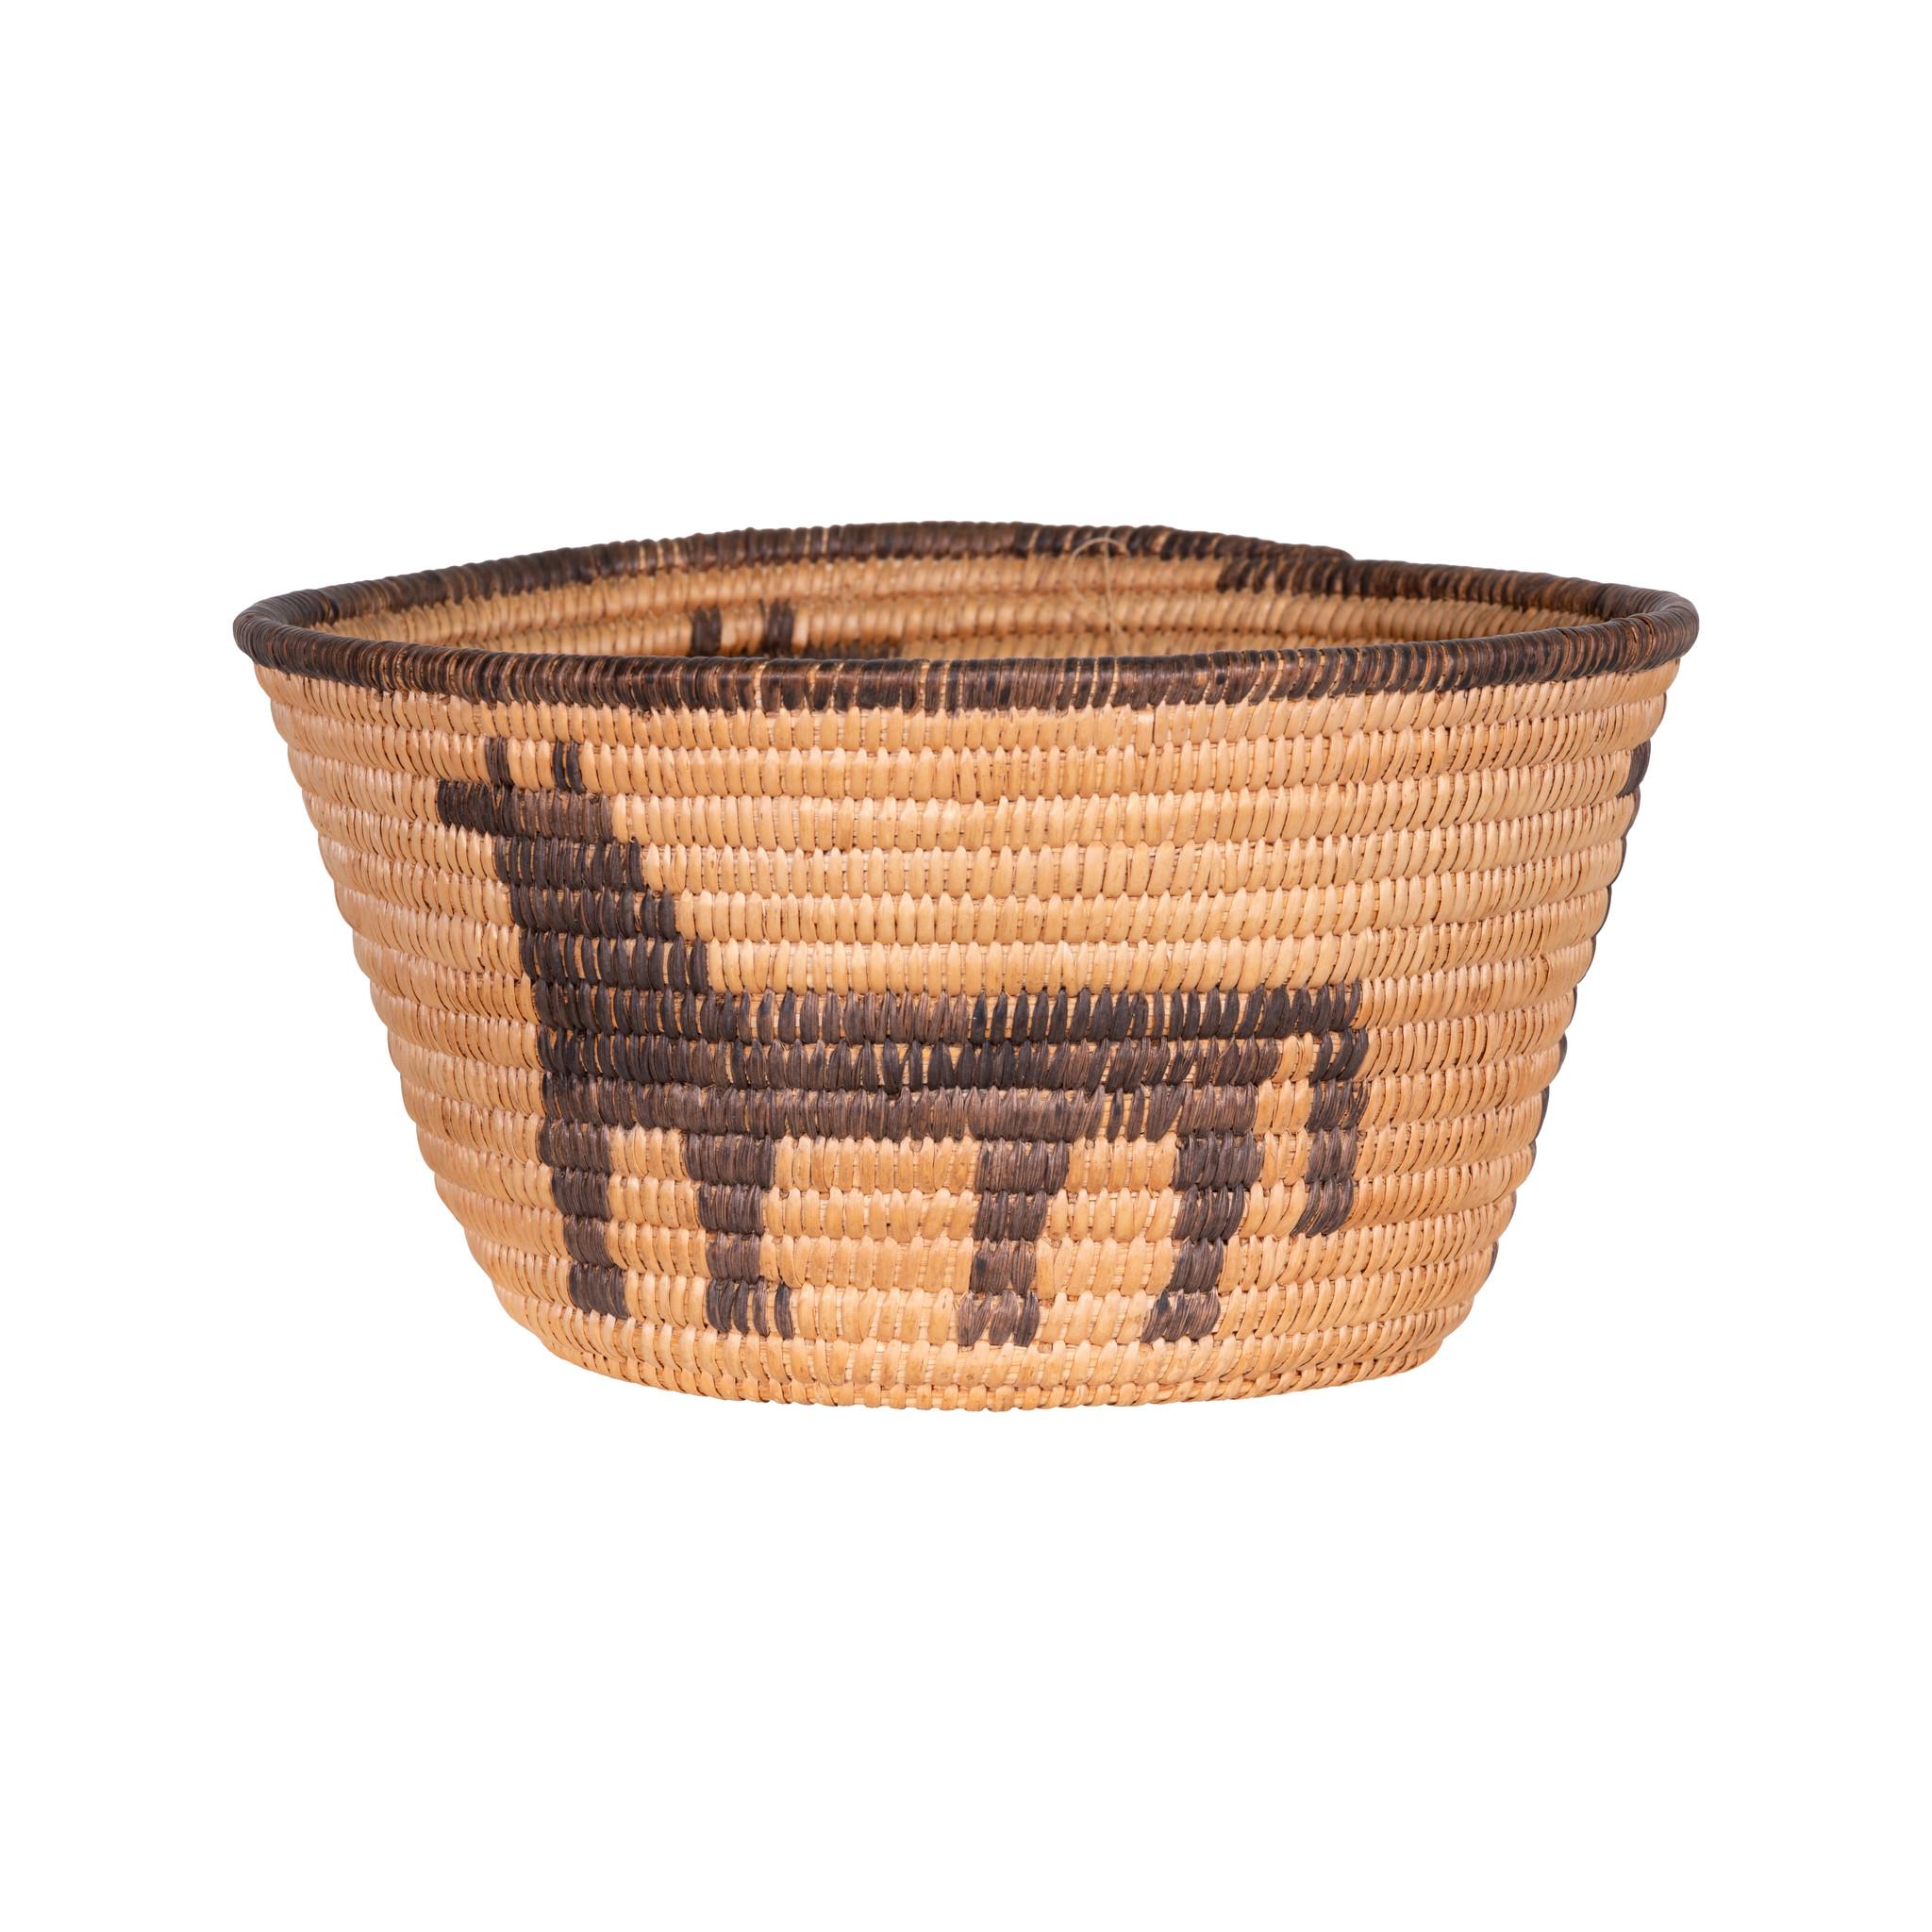 Pictorial Pima basket with three horses and old purchase tag on bottom 